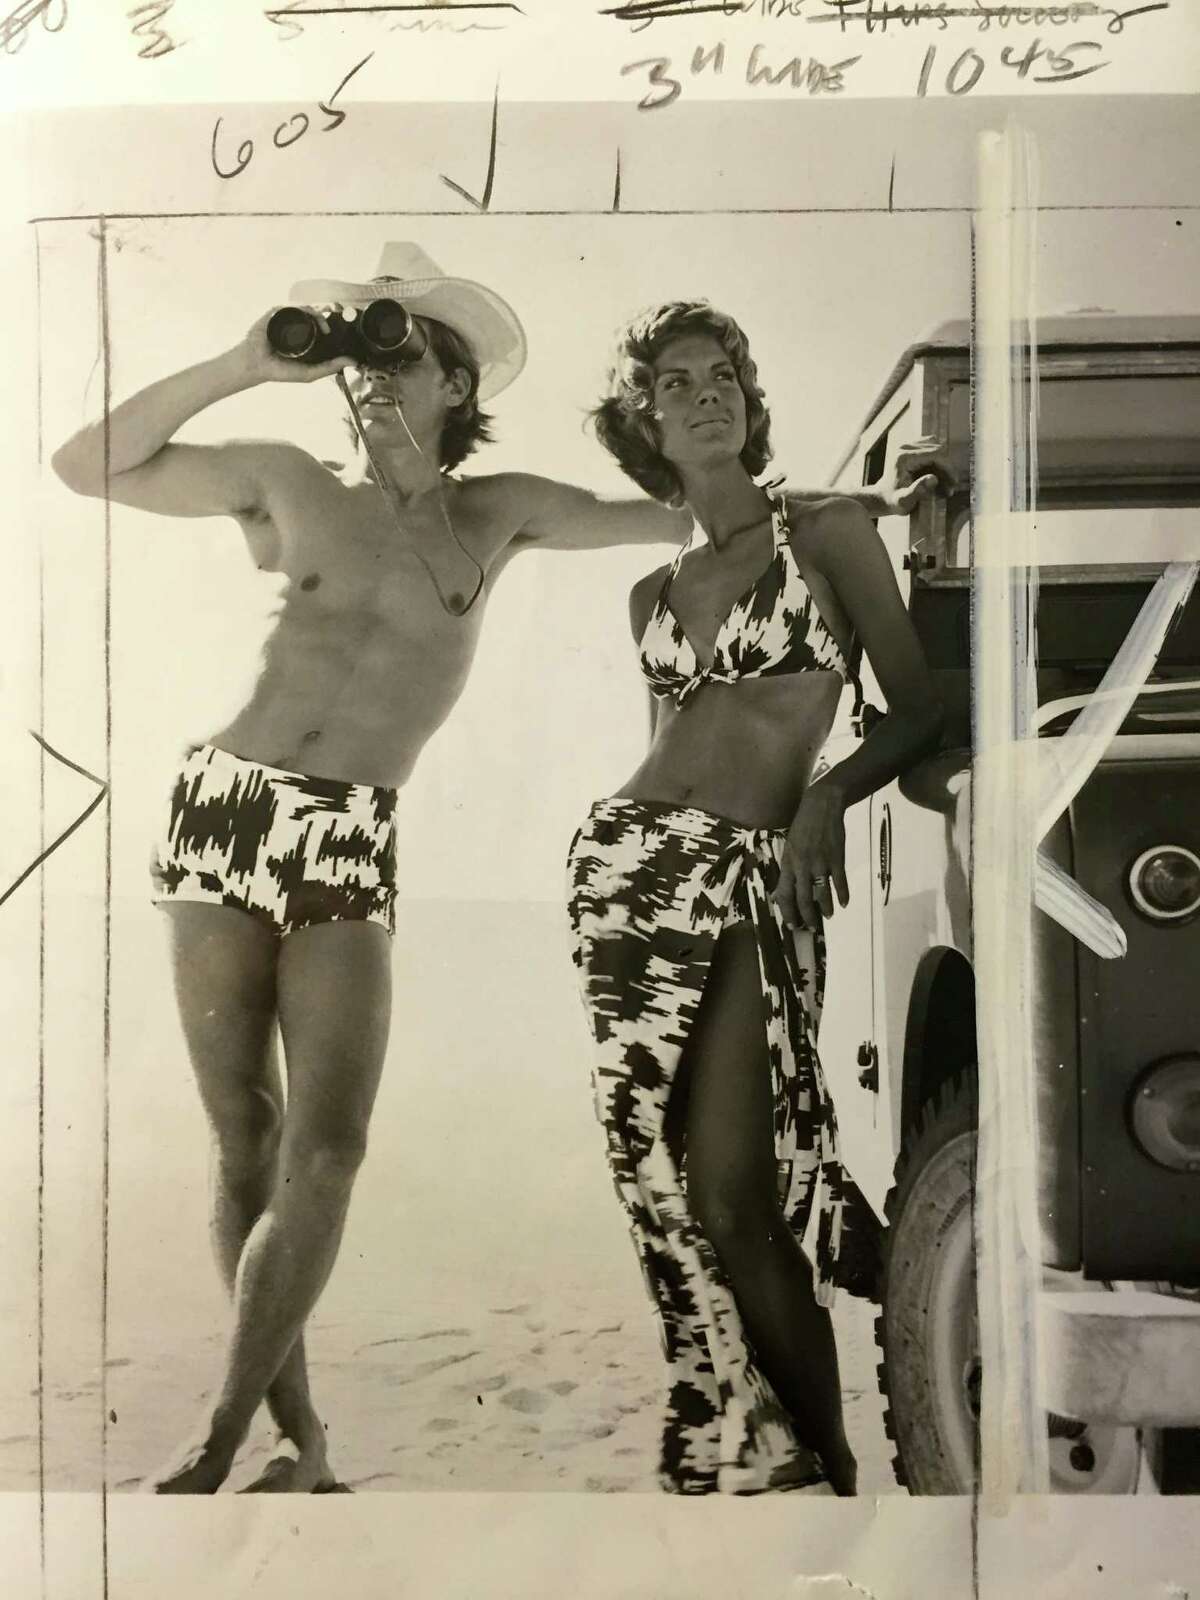 1972 PI caption: Bikinis are big stuff on the beaches. His and her outfits attract attention.